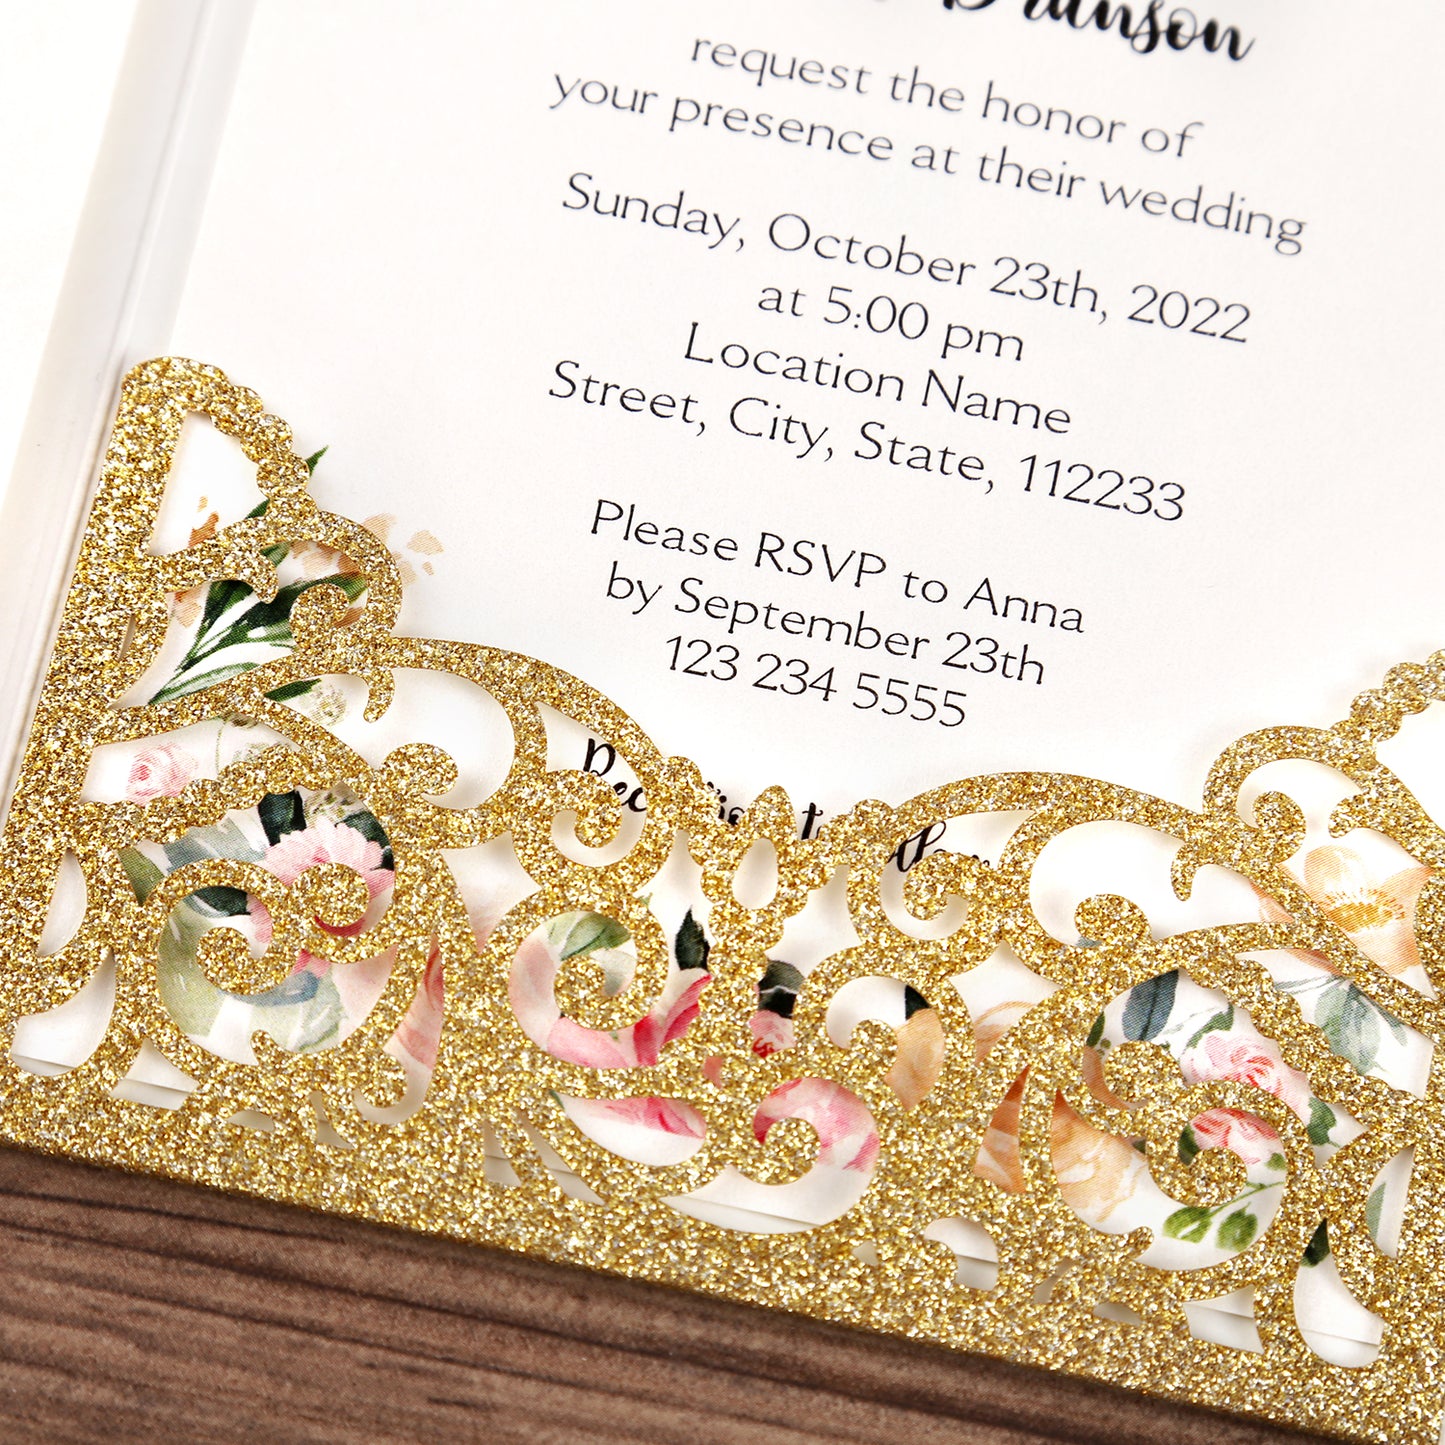 4.7 x7 inch Gold Glitter Laser Cut Wedding Invitations With Envelopes Kit Hollow Rose Pocket And Burgundy Ribbon Belly Band for Wedding Bridal Shower Engagement Invite